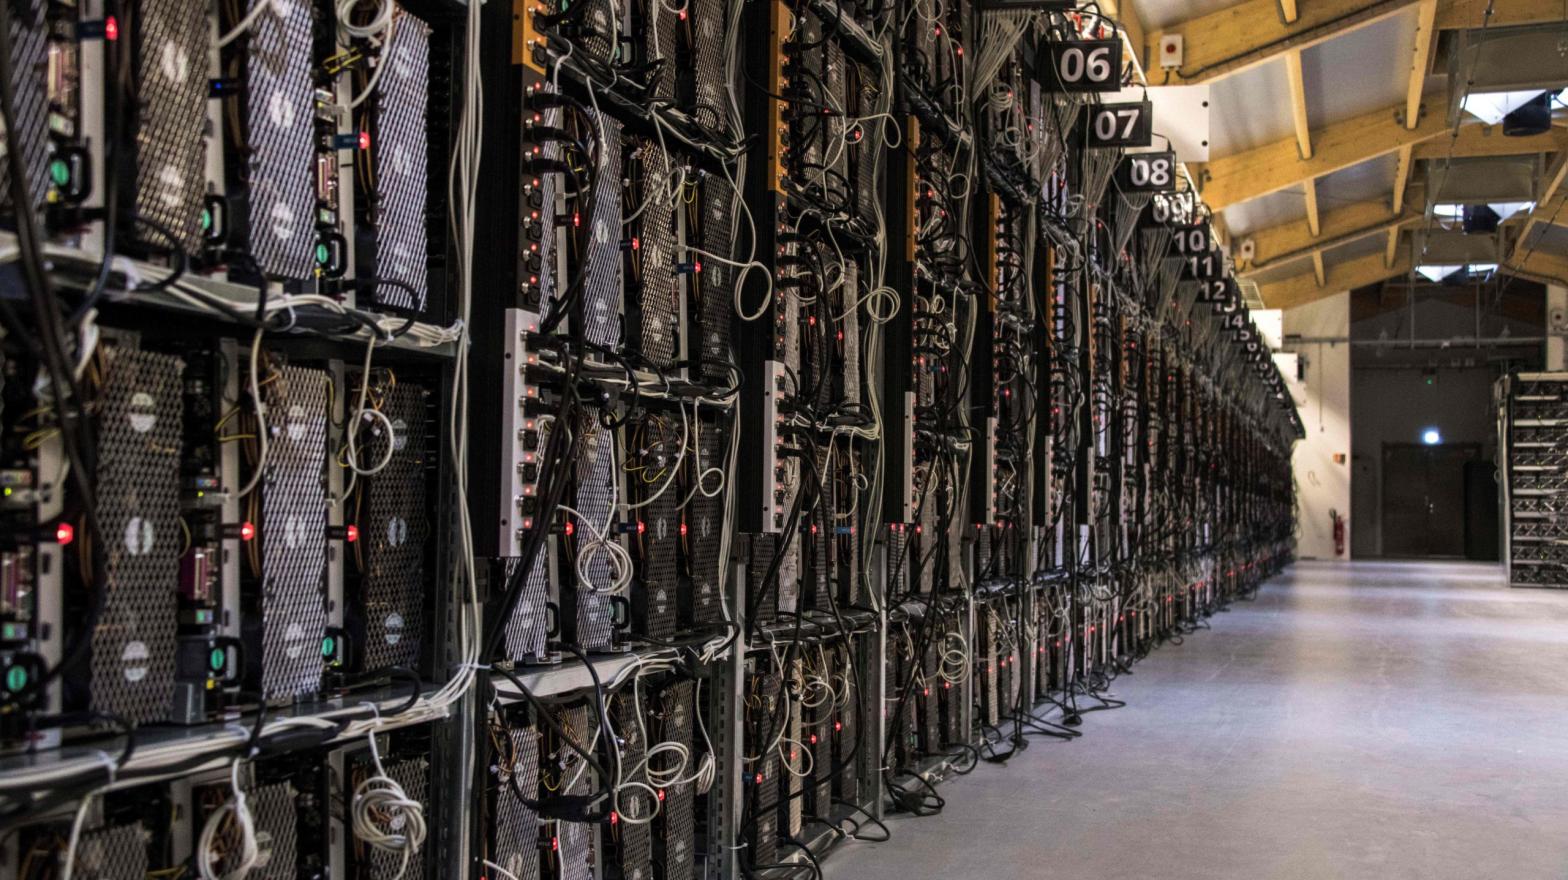 A bitcoin mining rig, not the bitcoin mining rig in question. (Photo: Halldor Kolbeins, Getty Images)